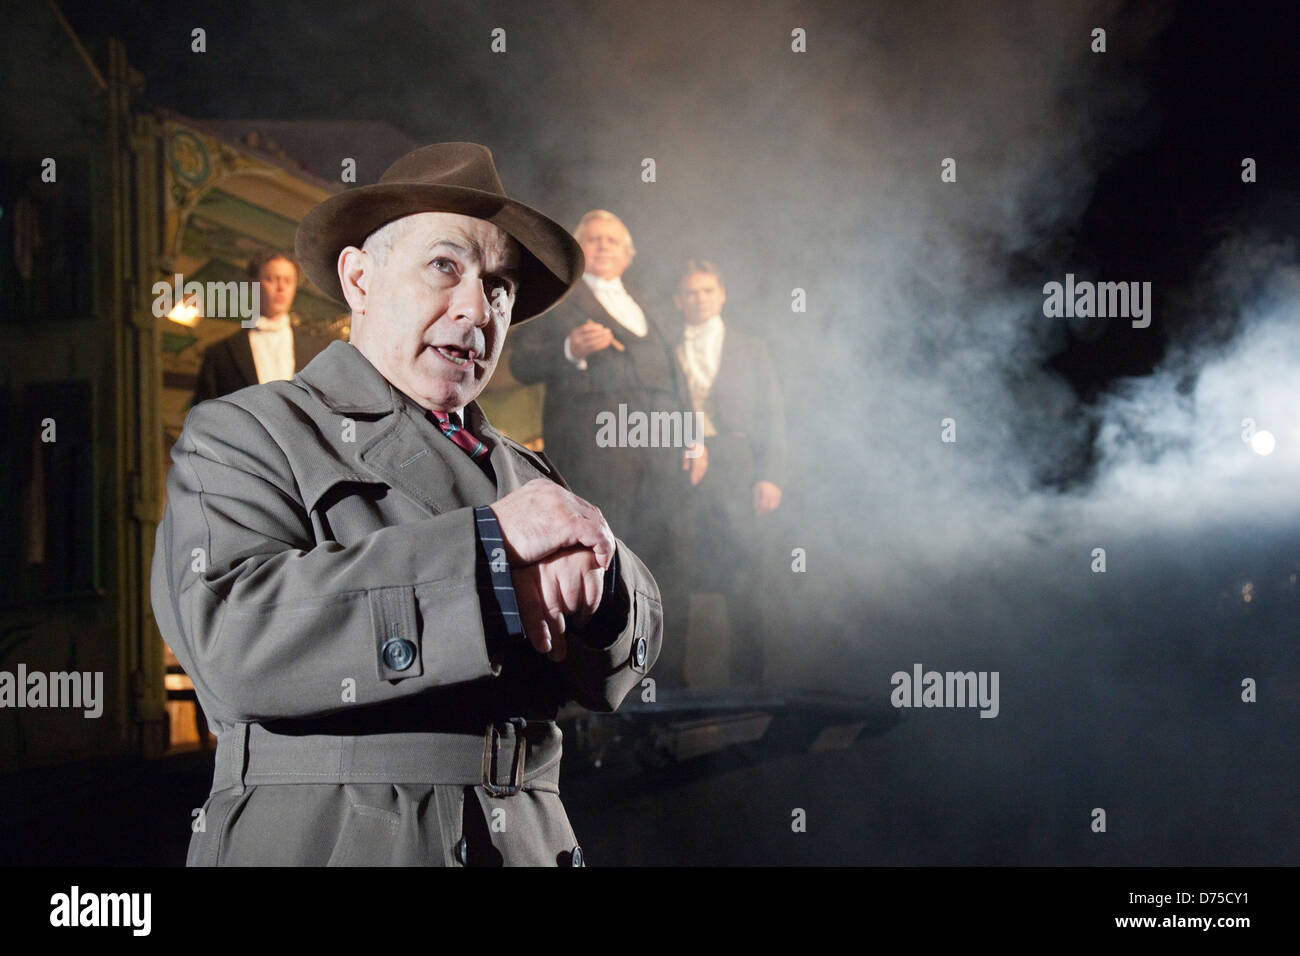 An Inspector Calls - Stage Play at the Novello Theatre directed by Stephen Daldry. Nicholas Woodeson as the Inspector. Stock Photo